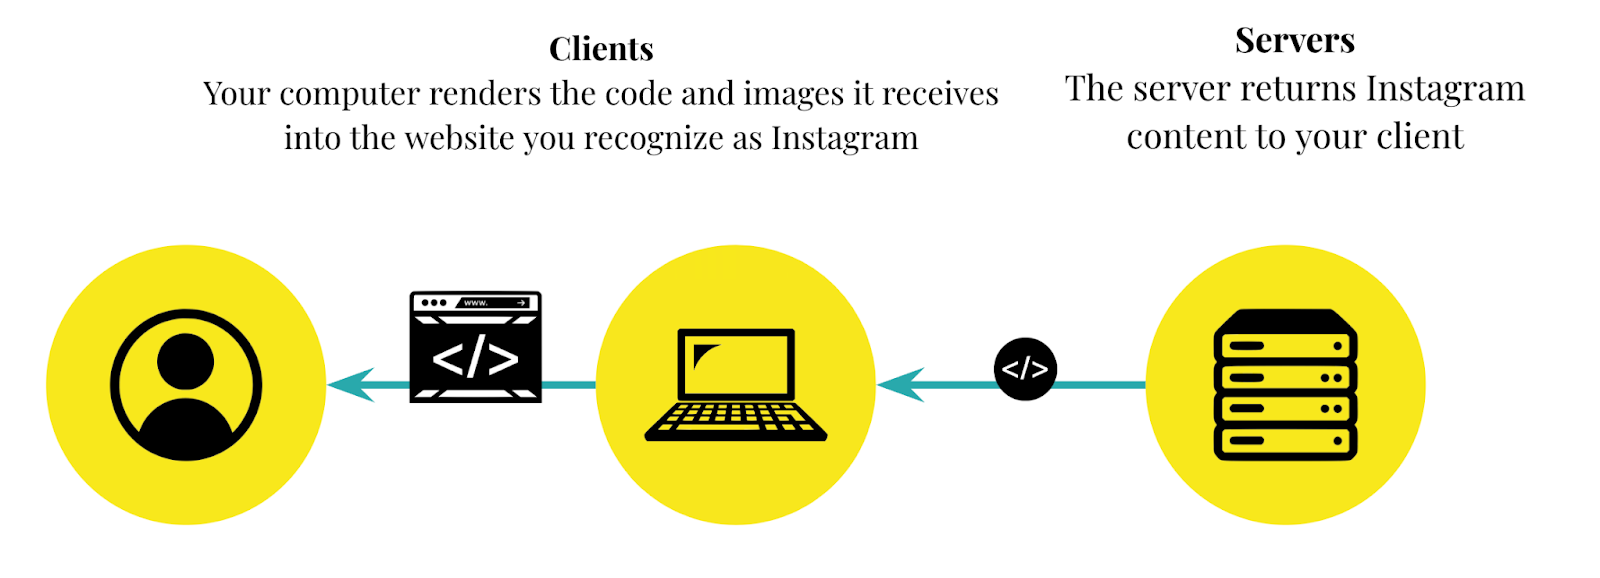 A diagram illustrating how Instragram servers send a response to a user's client computer, which renders the Instagram website or app